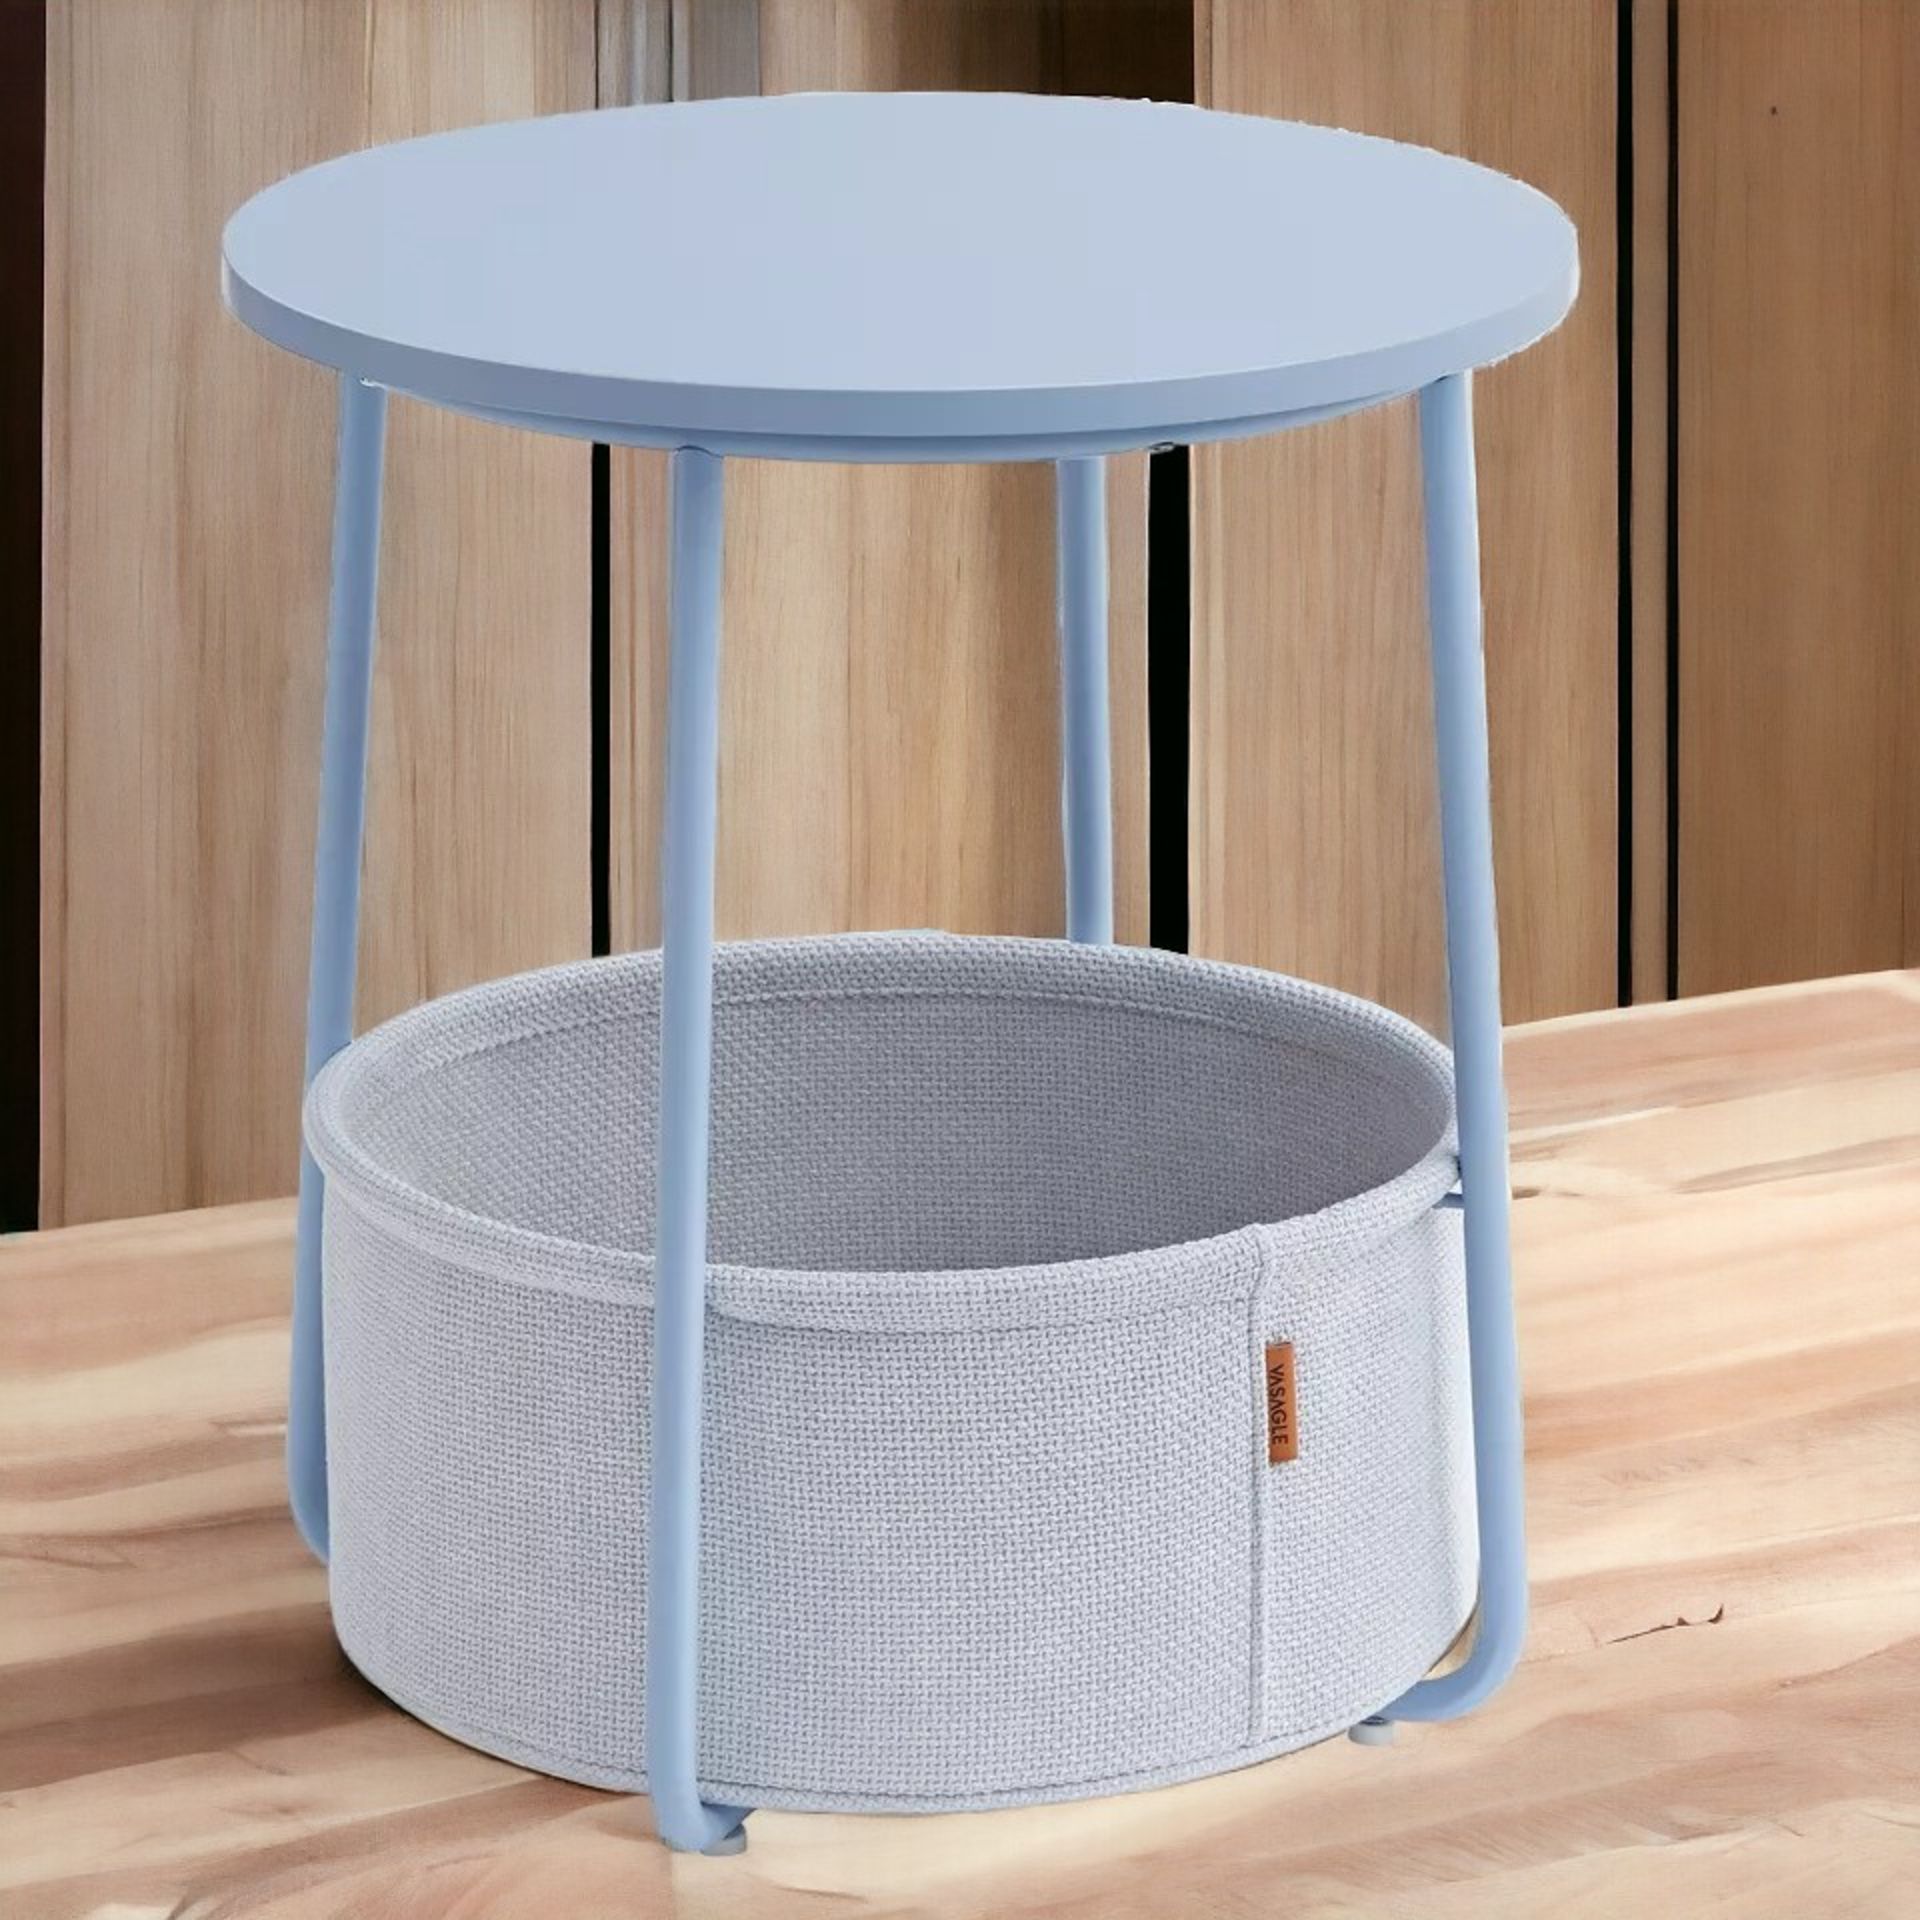 FREE DELIVERY - BRAND NEW SIDE TABLE ROUND END TABLE FABRIC BASKET SPACIOUS